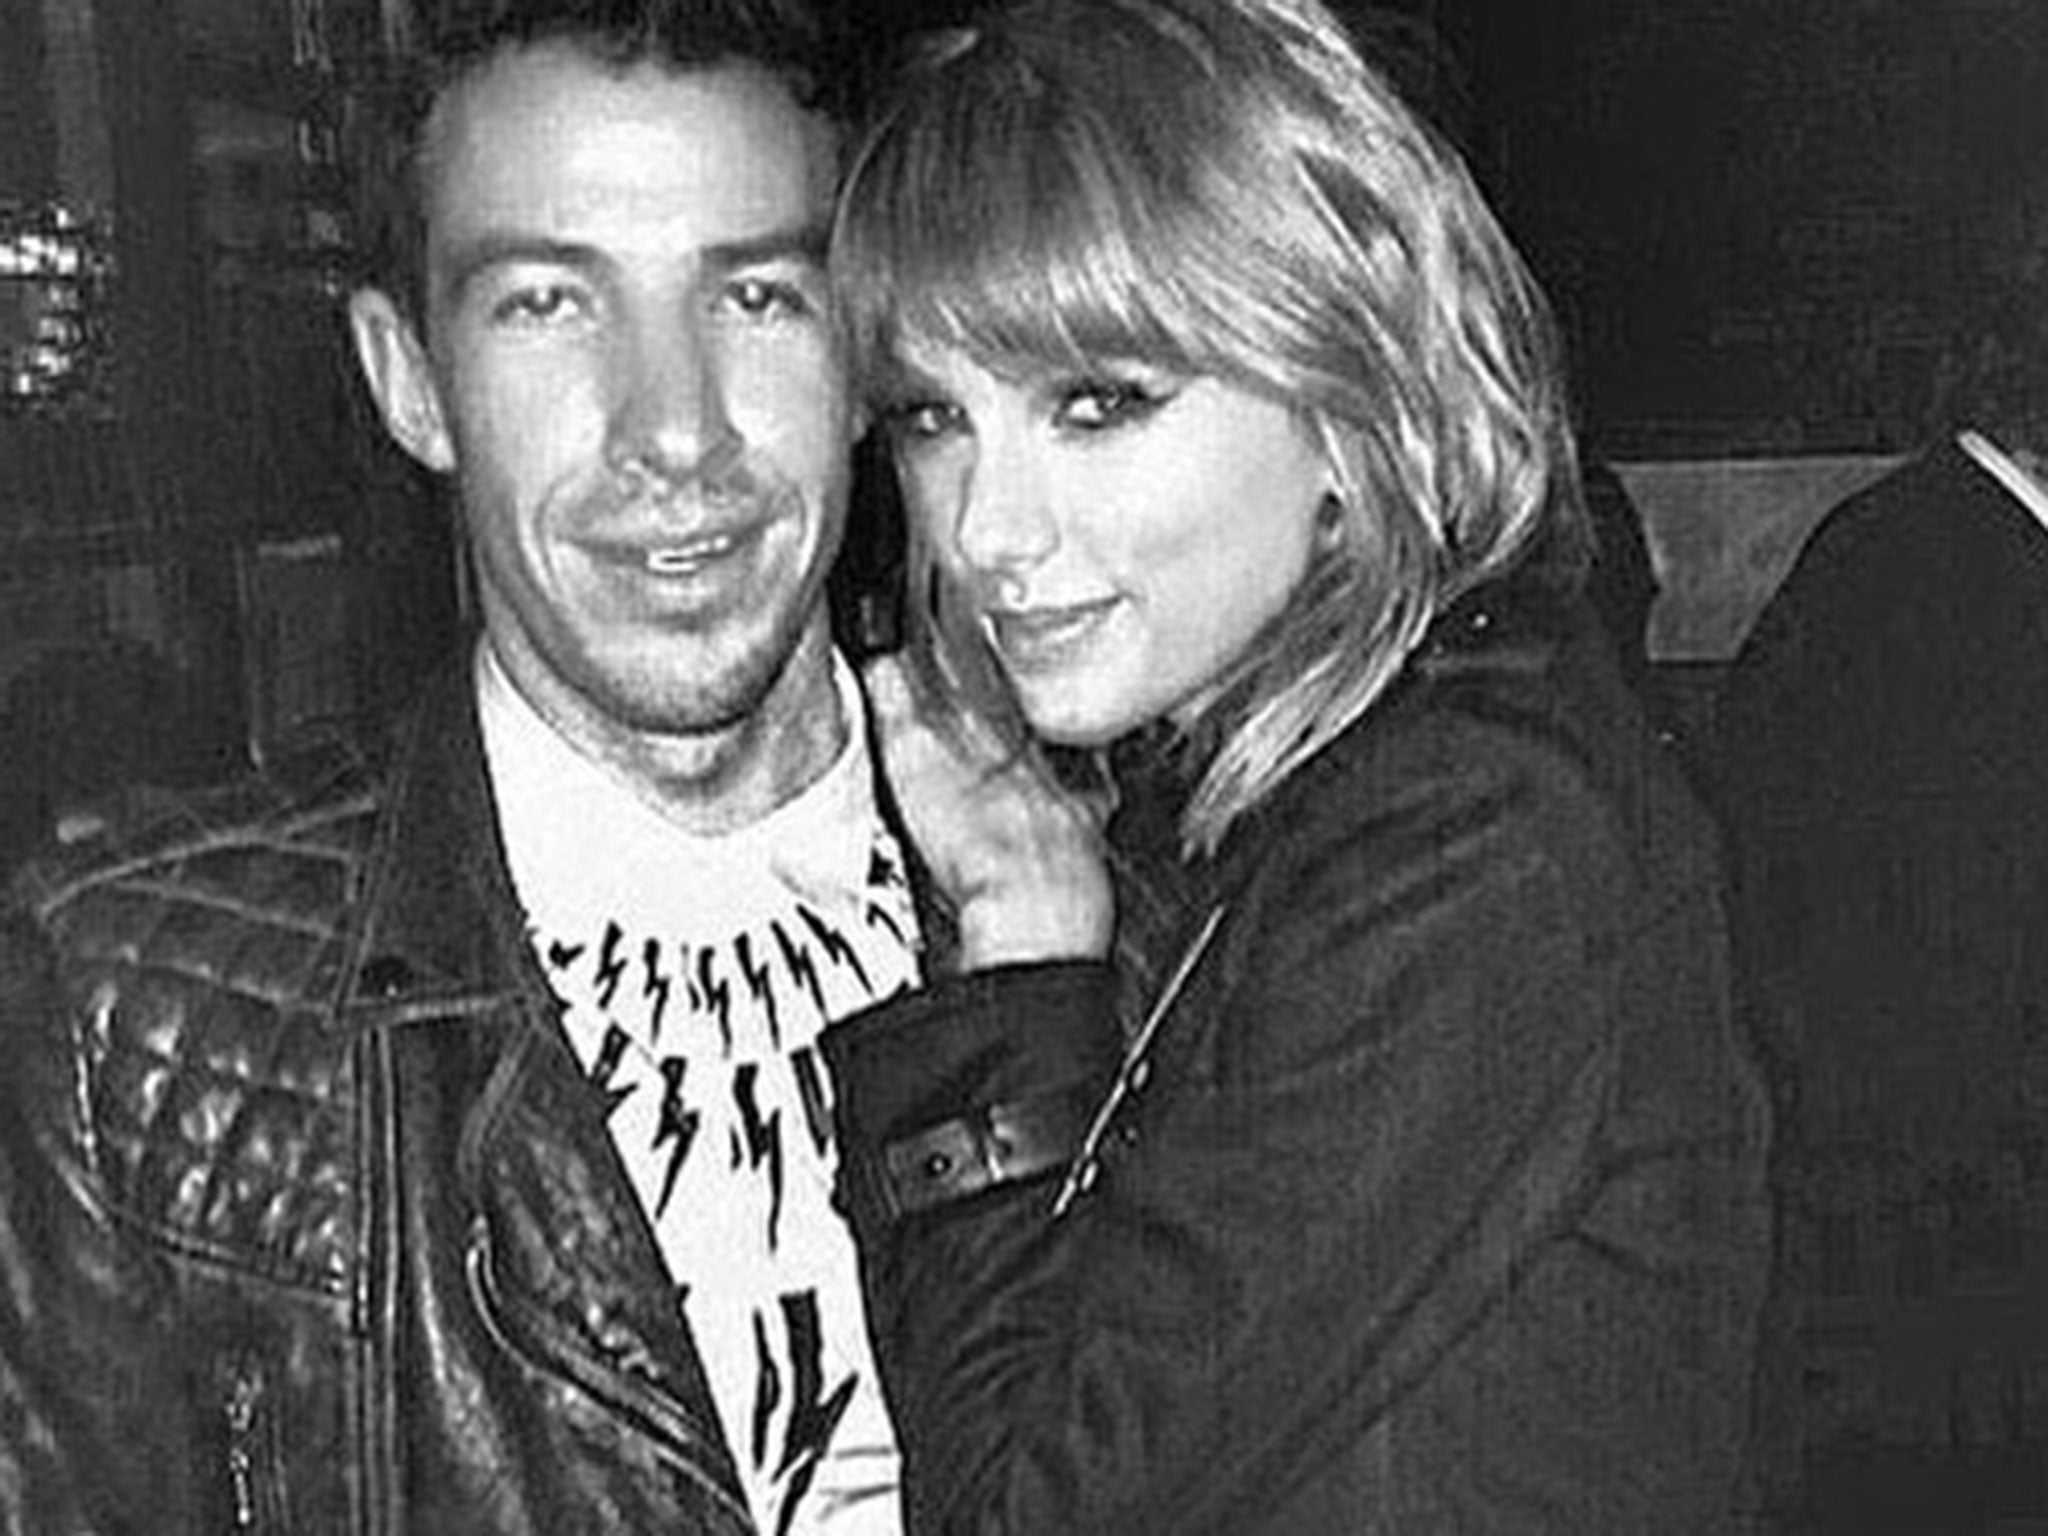 The pic Sean St Ledger uploaded to his Twitter account with Taylor Swift